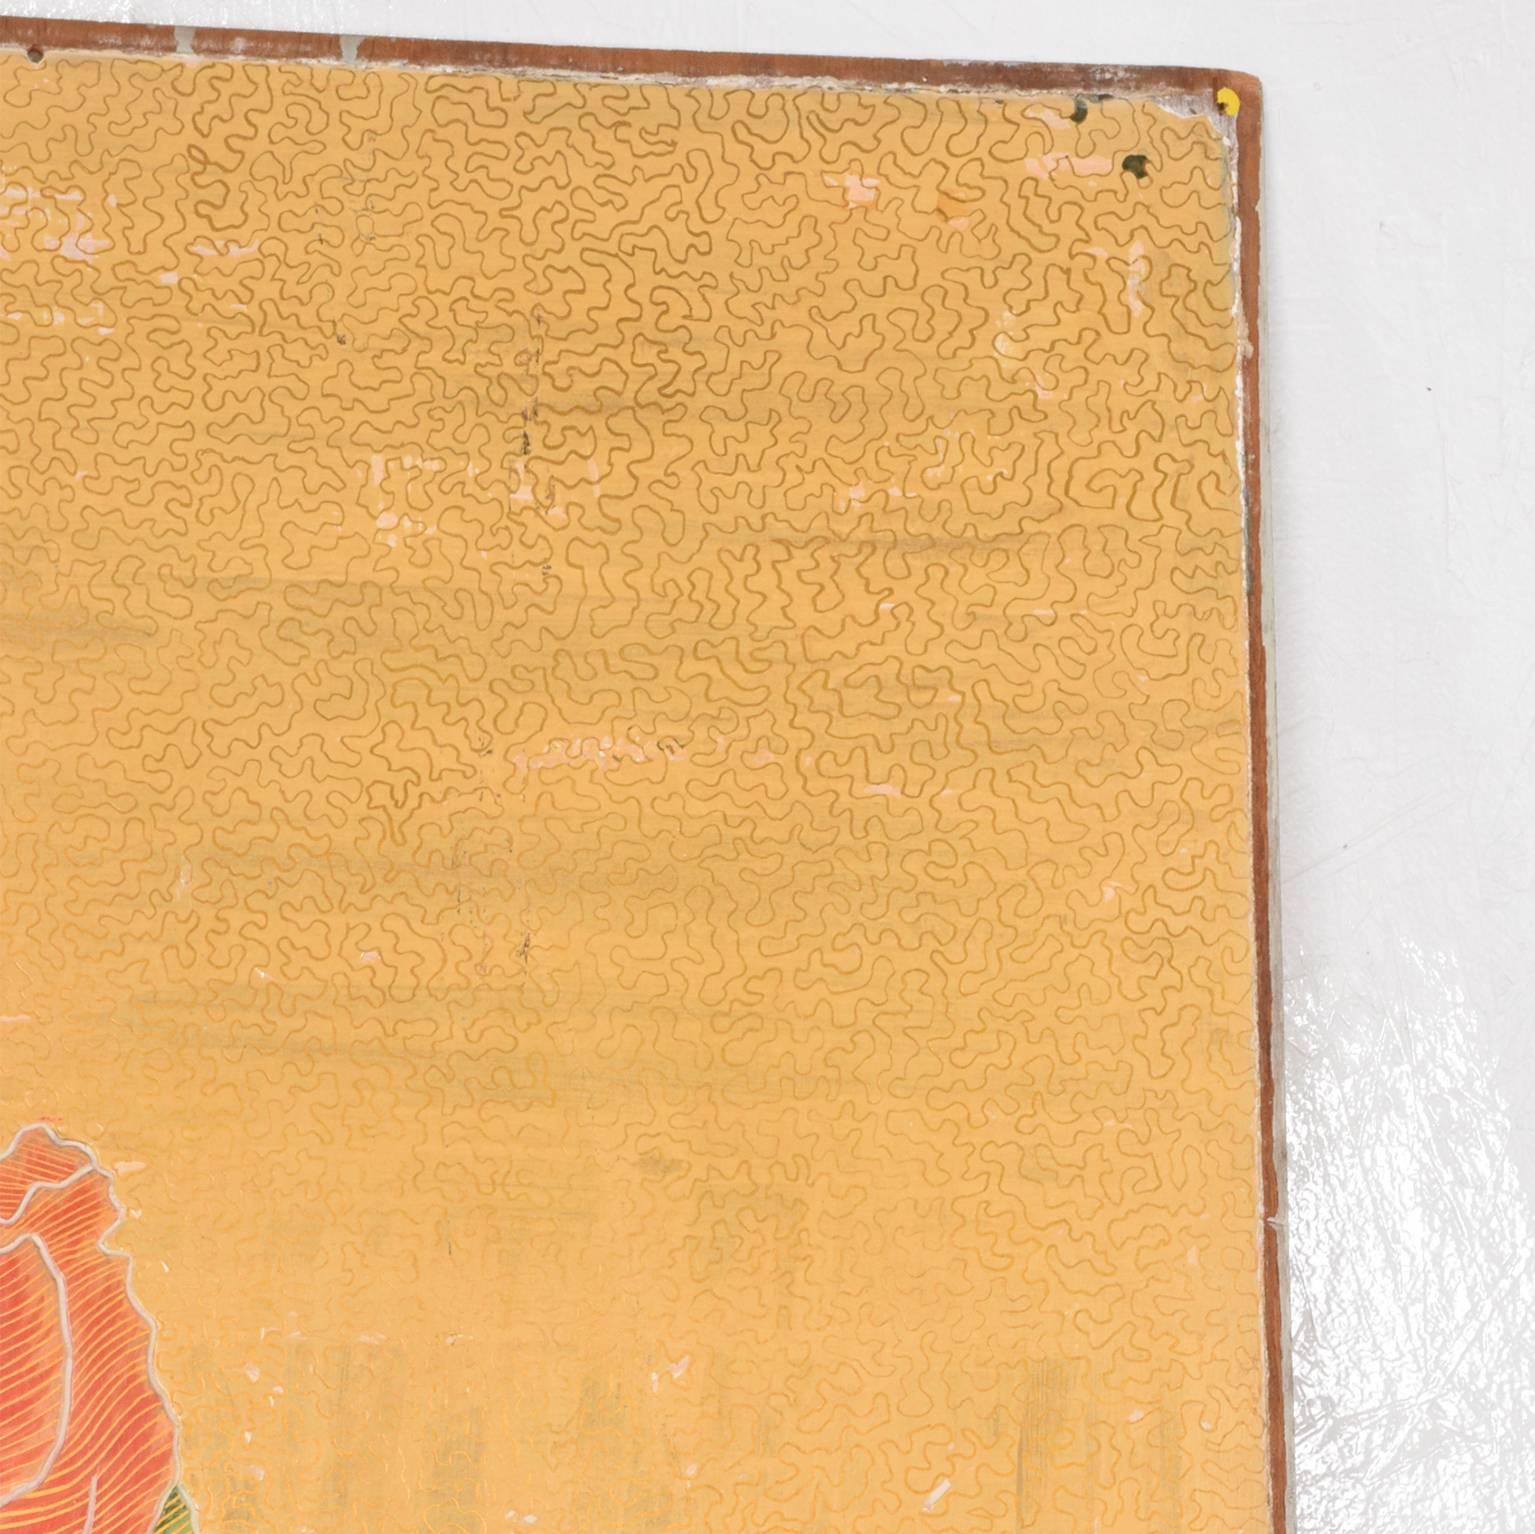 For your consideration, a Mexican modernist door panel gold leaf decoration. 
The panel is 1/4